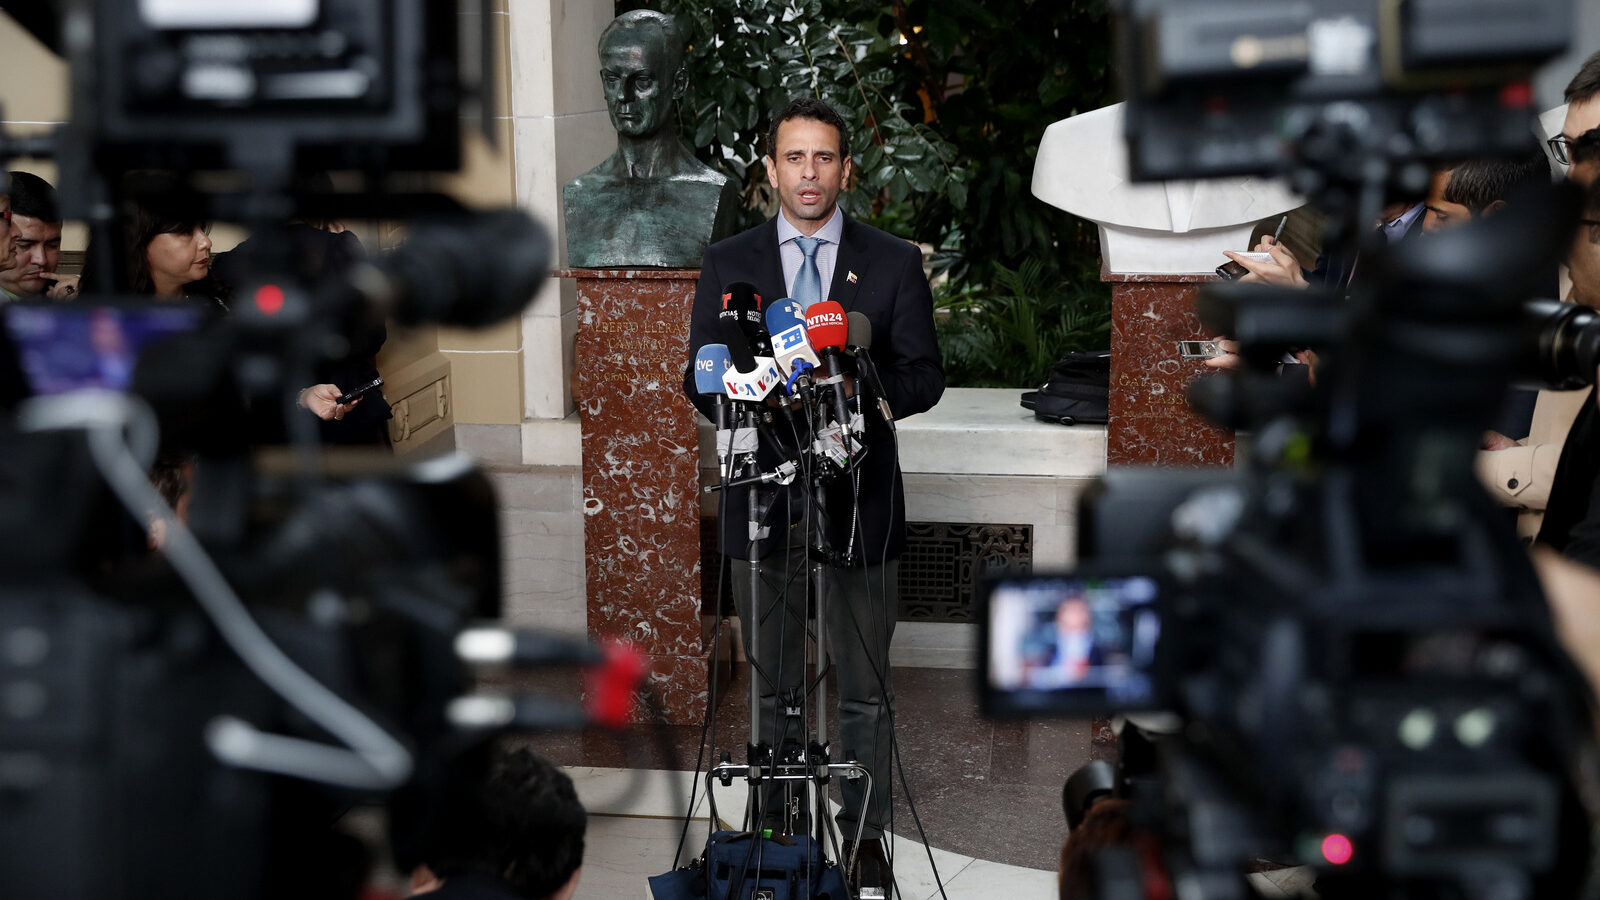 Venezuelan opposition leader Henrique Capriles speaks to the media following his meeting with Organization of American States (OAS) Secretary General Luis Almagro, at the OAS building in Washington, March 31, 2017. (AP/Pablo Martinez Monsivais)